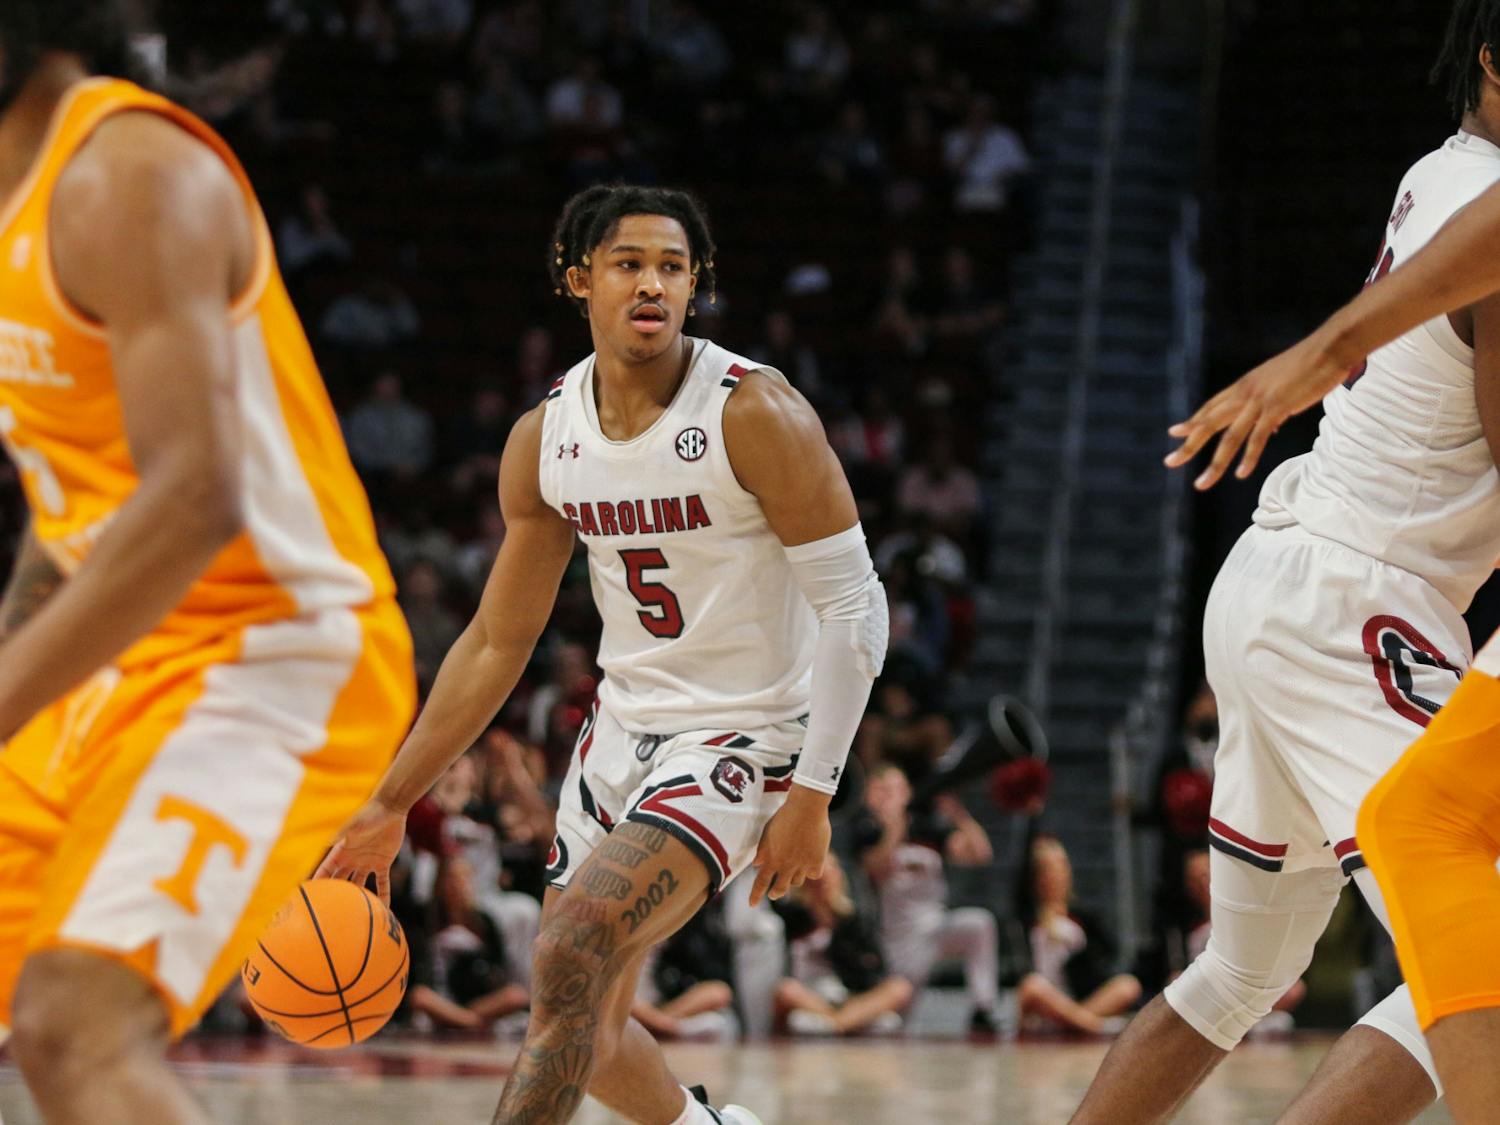 Sophomore guard Meechie Johnson starts the offense on Jan. 7, 2023. The Gamecocks lost to Volunteers 85-42.